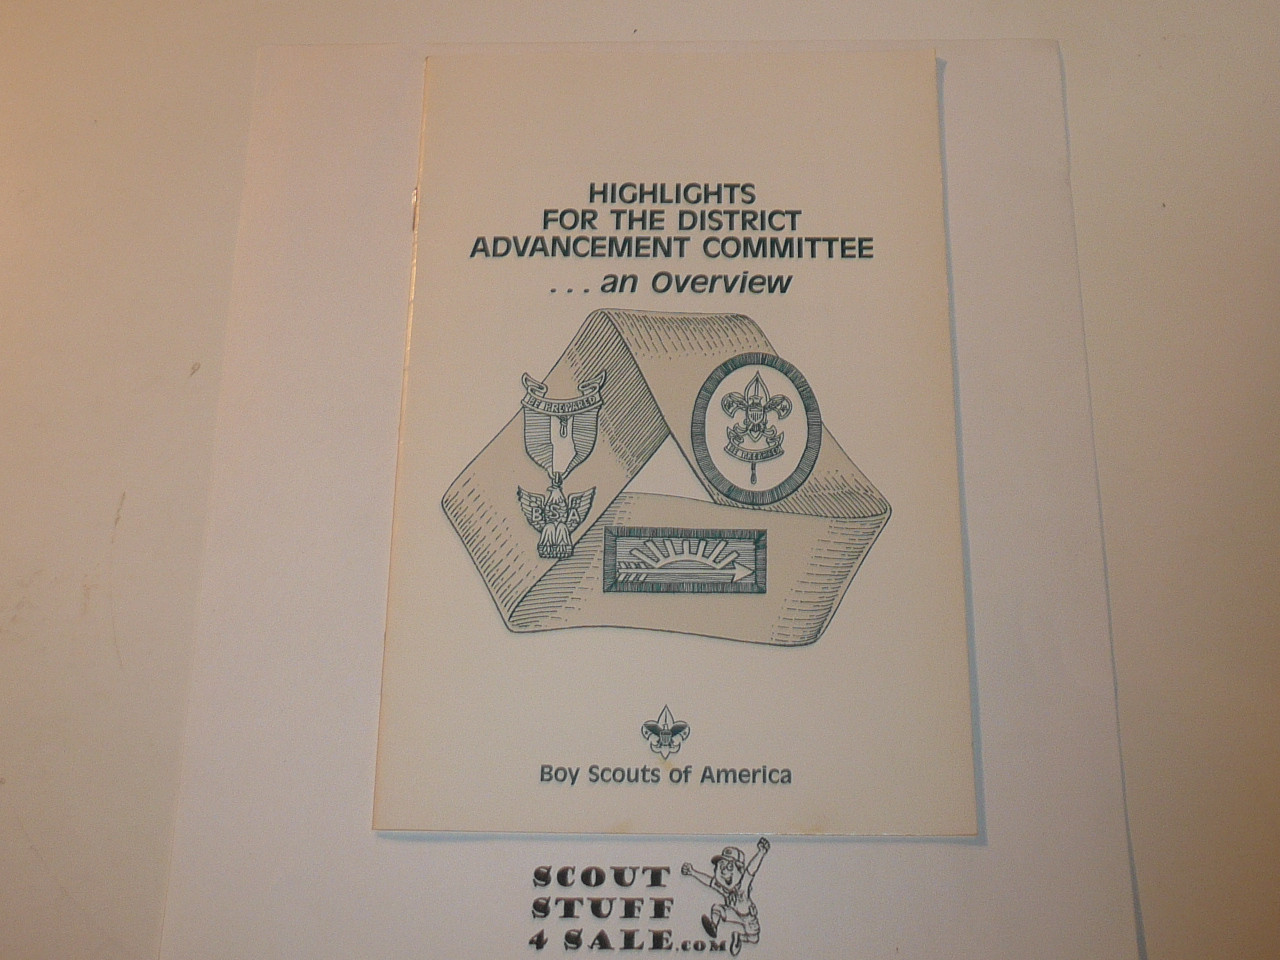 1989 Highlights for the District Advancement Committee...an Overview